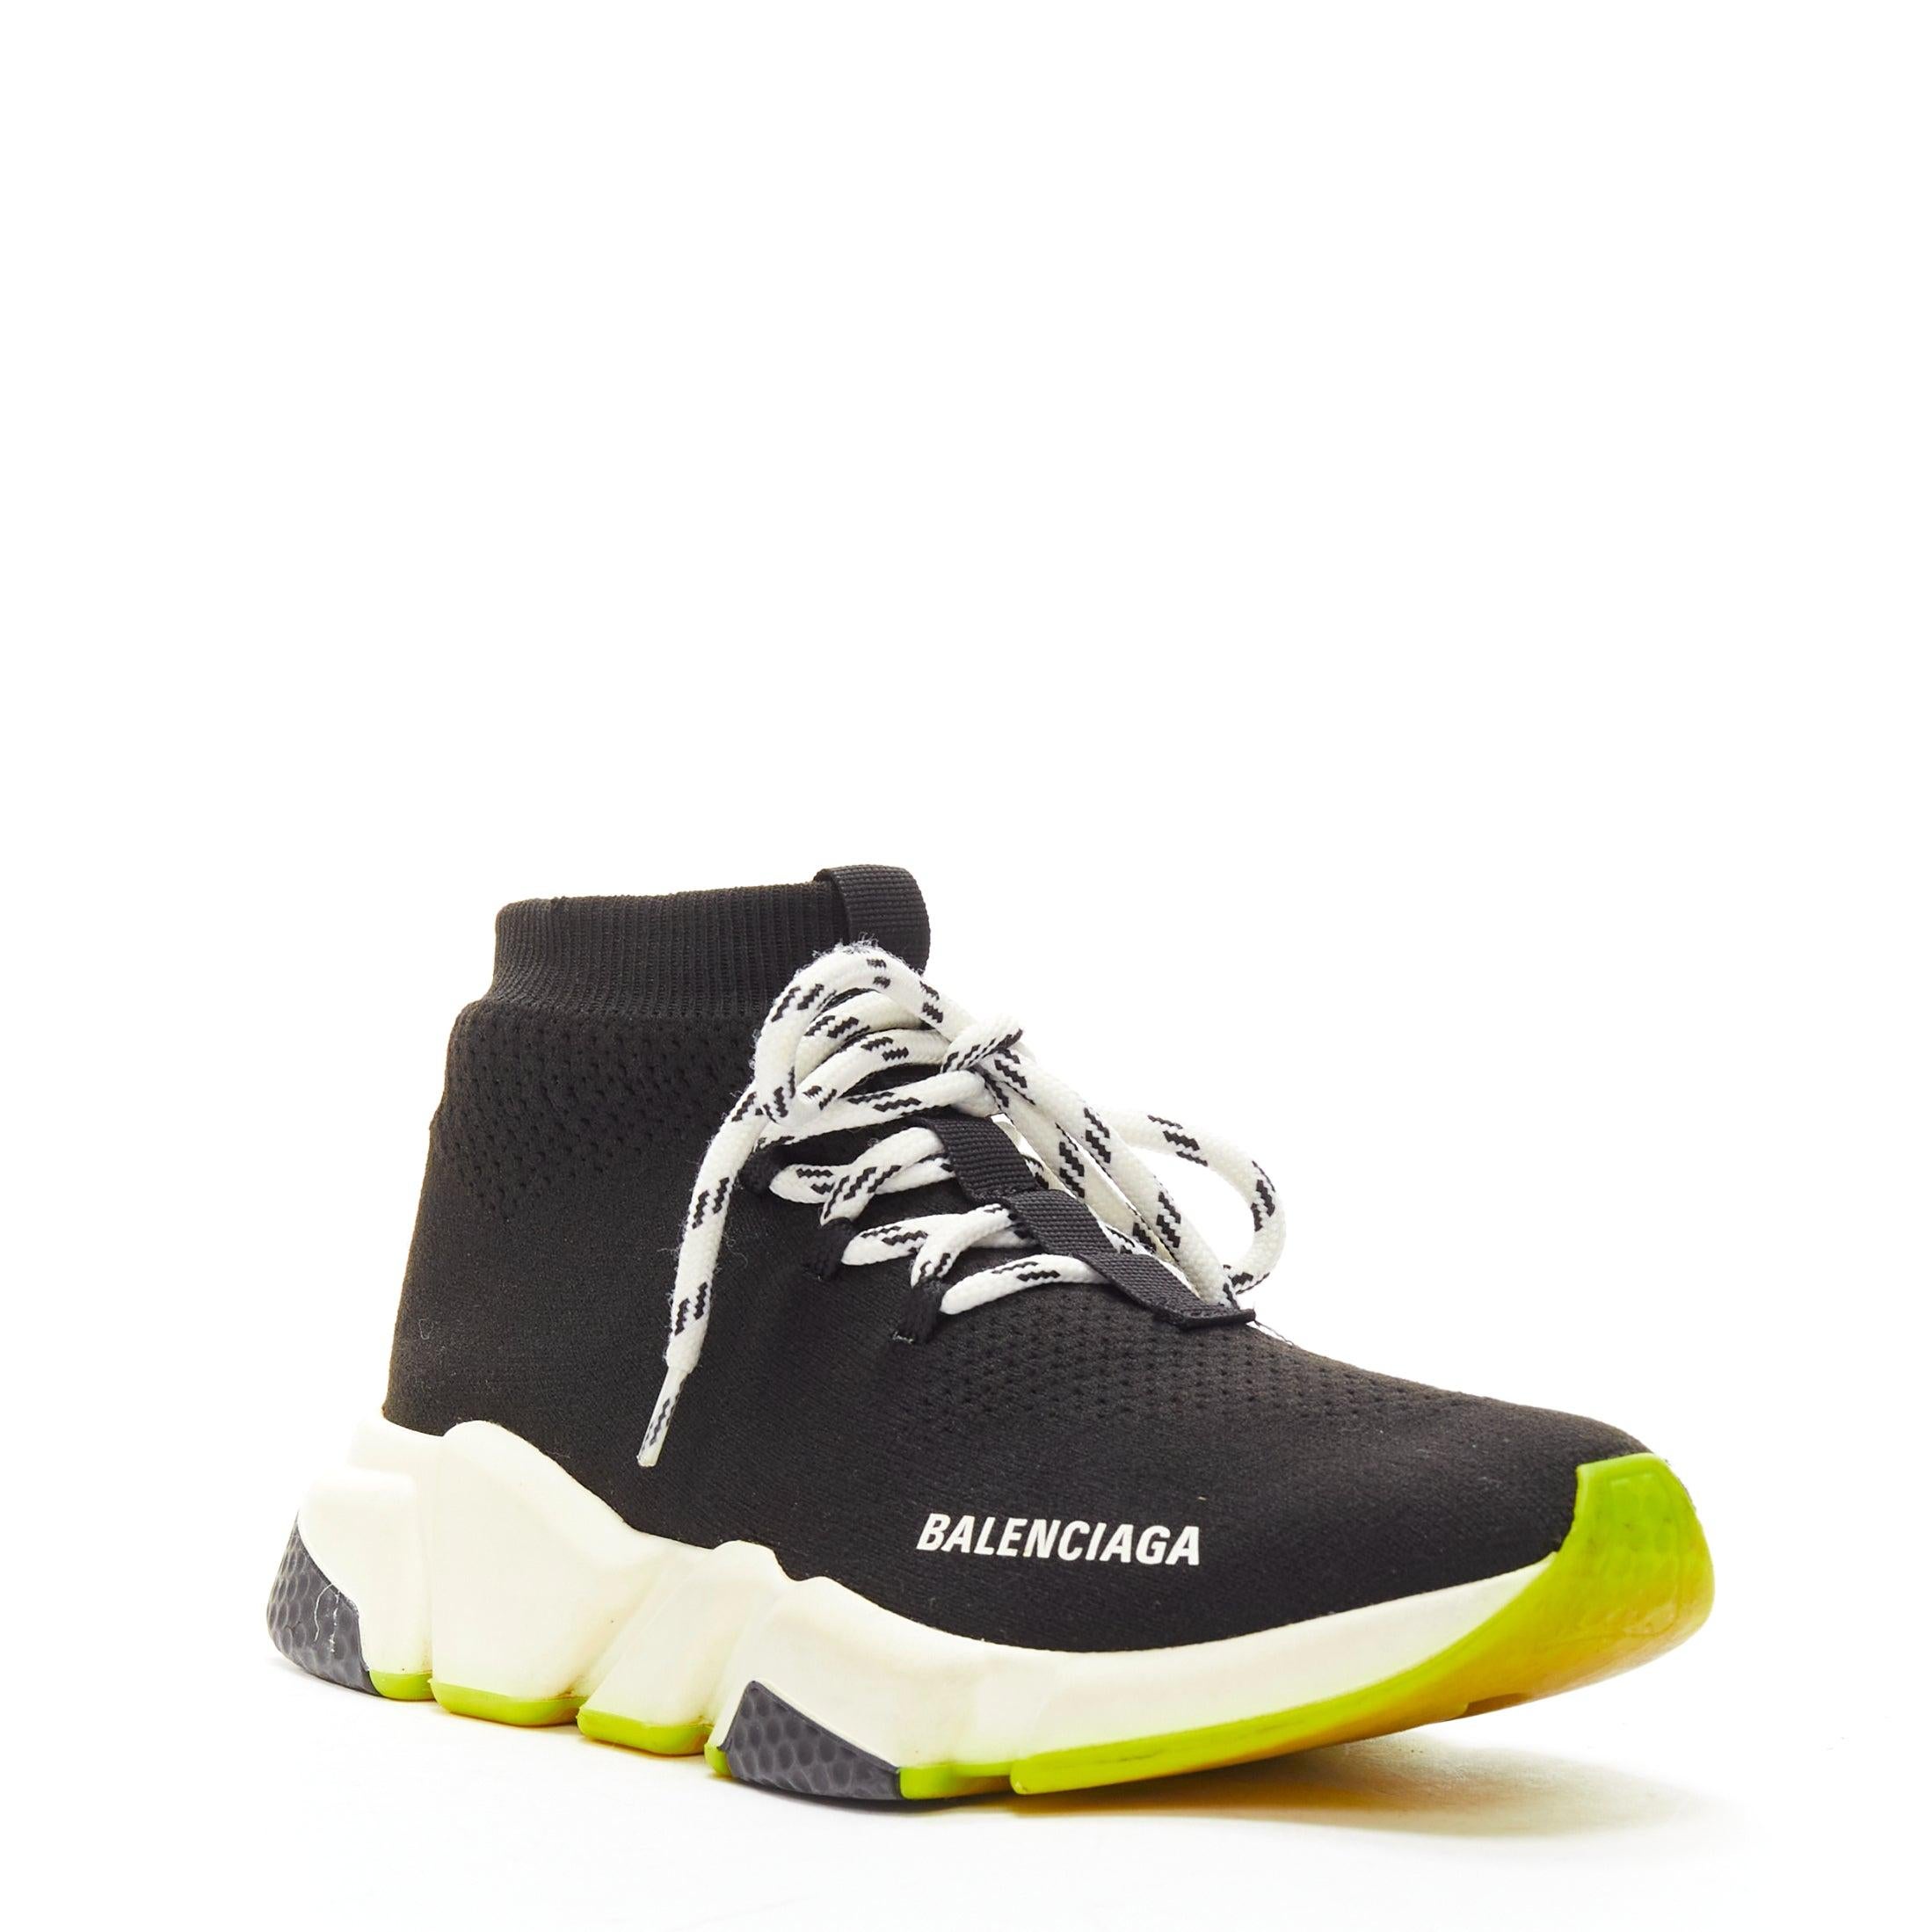 BALENCIAGA Speed black fabric neon yellow sole sock sneakers EU37
Reference: CELE/A00009
Brand: Balenciaga
Designer: Demna
Model: Speed
Material: Fabric
Color: Black, Neon Yellow
Pattern: Solid
Closure: Lace Up
Lining: Black Fabric
Extra Details: